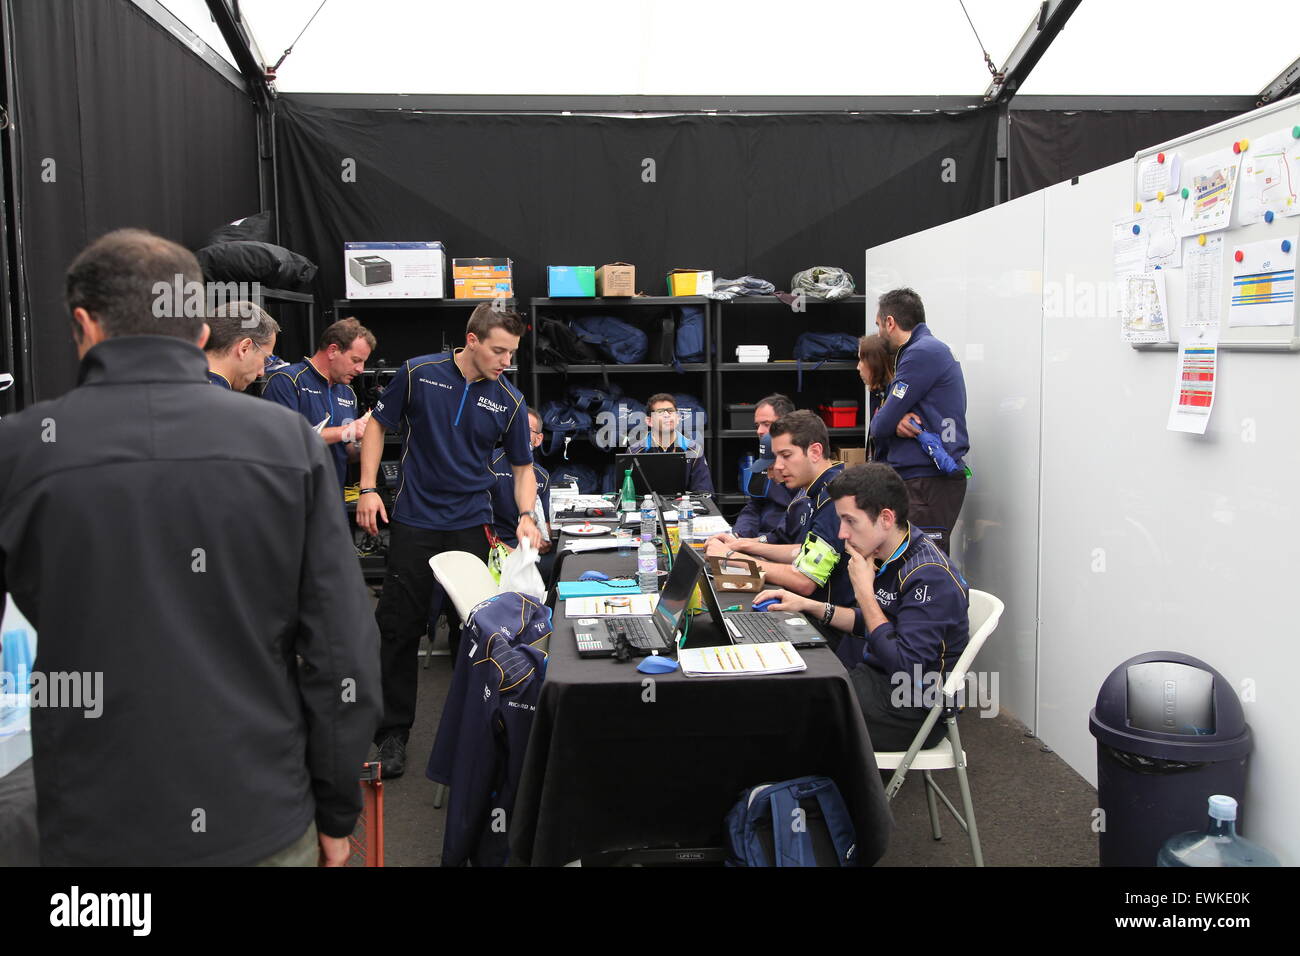 London, UK. 28th June, 2015. Action at the last and deciding round of the FIA Formula E Championship - The eDams (run by Alain Prost) technical boffins at work behind the scenes. Credit:  Motofoto/Alamy Live News Stock Photo